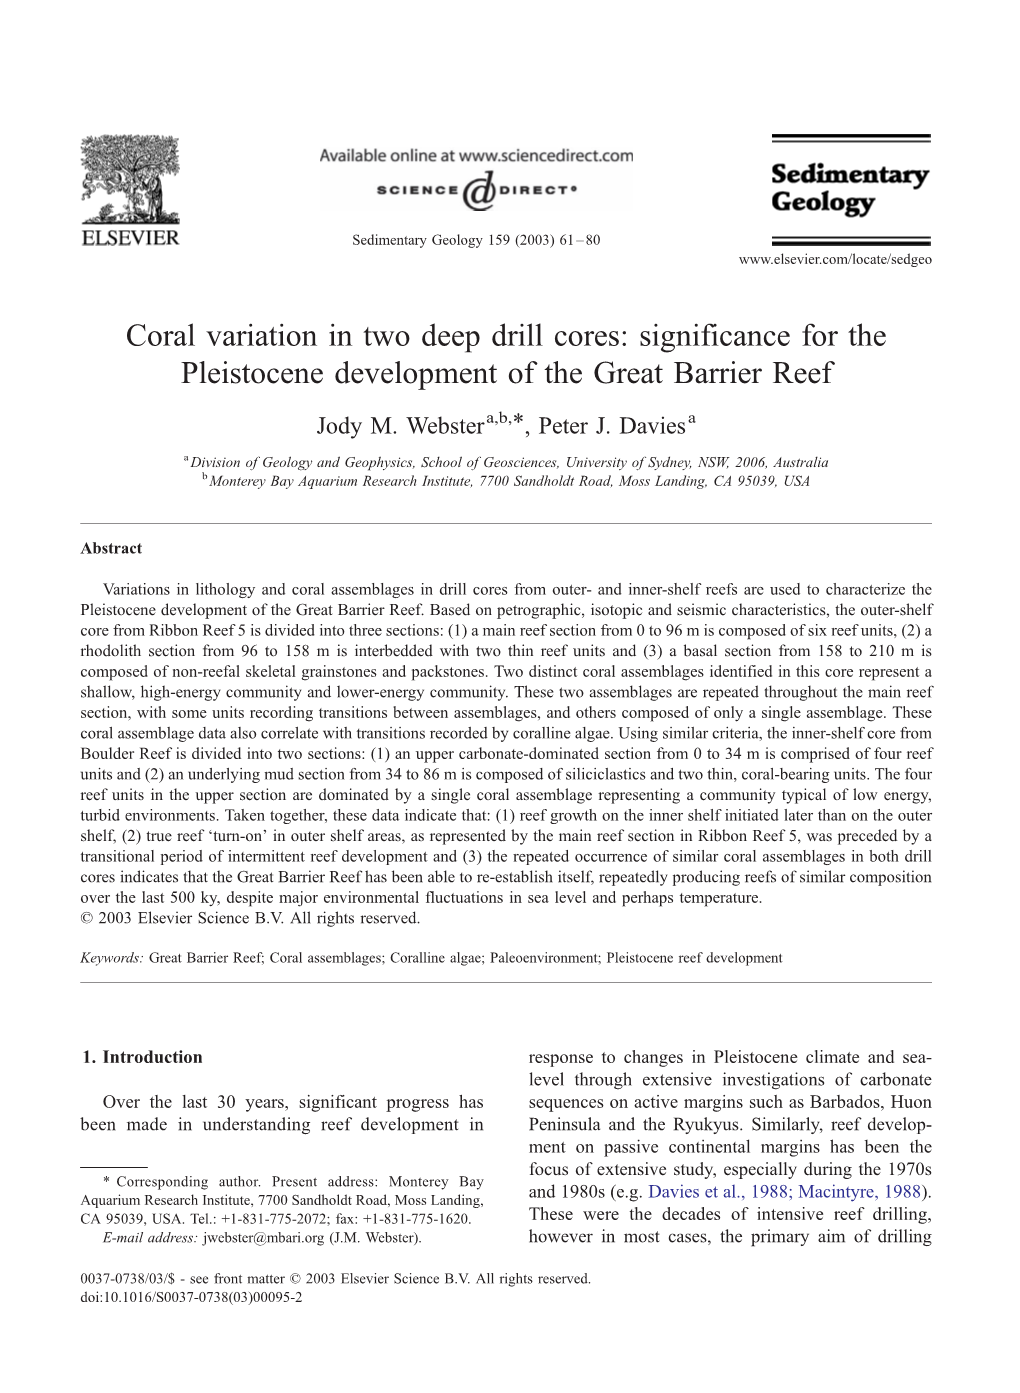 Significance for the Pleistocene Development of the Great Barrier Reef